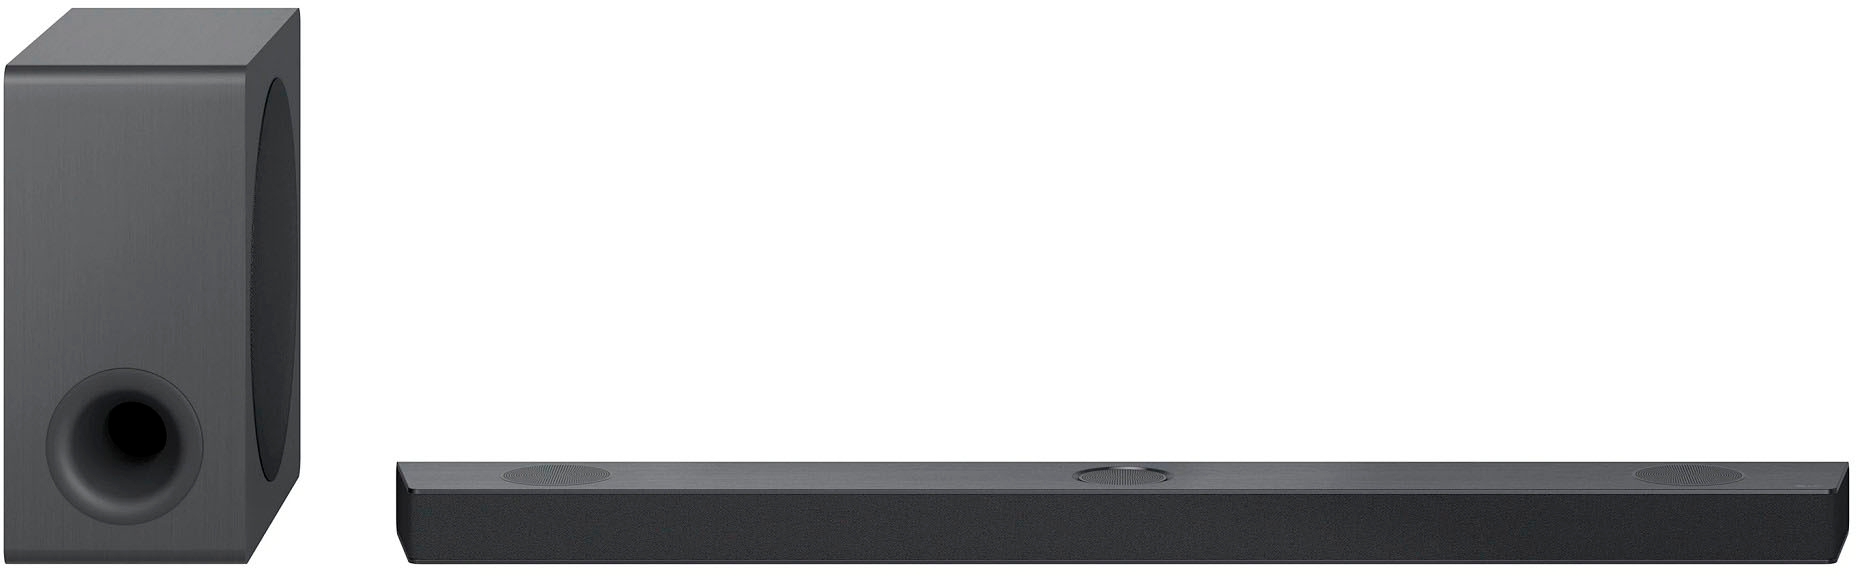 LG – 5.1.3 Channel Soundbar with Wireless Subwoofer, Dolby Atmos and DTS:X – Black